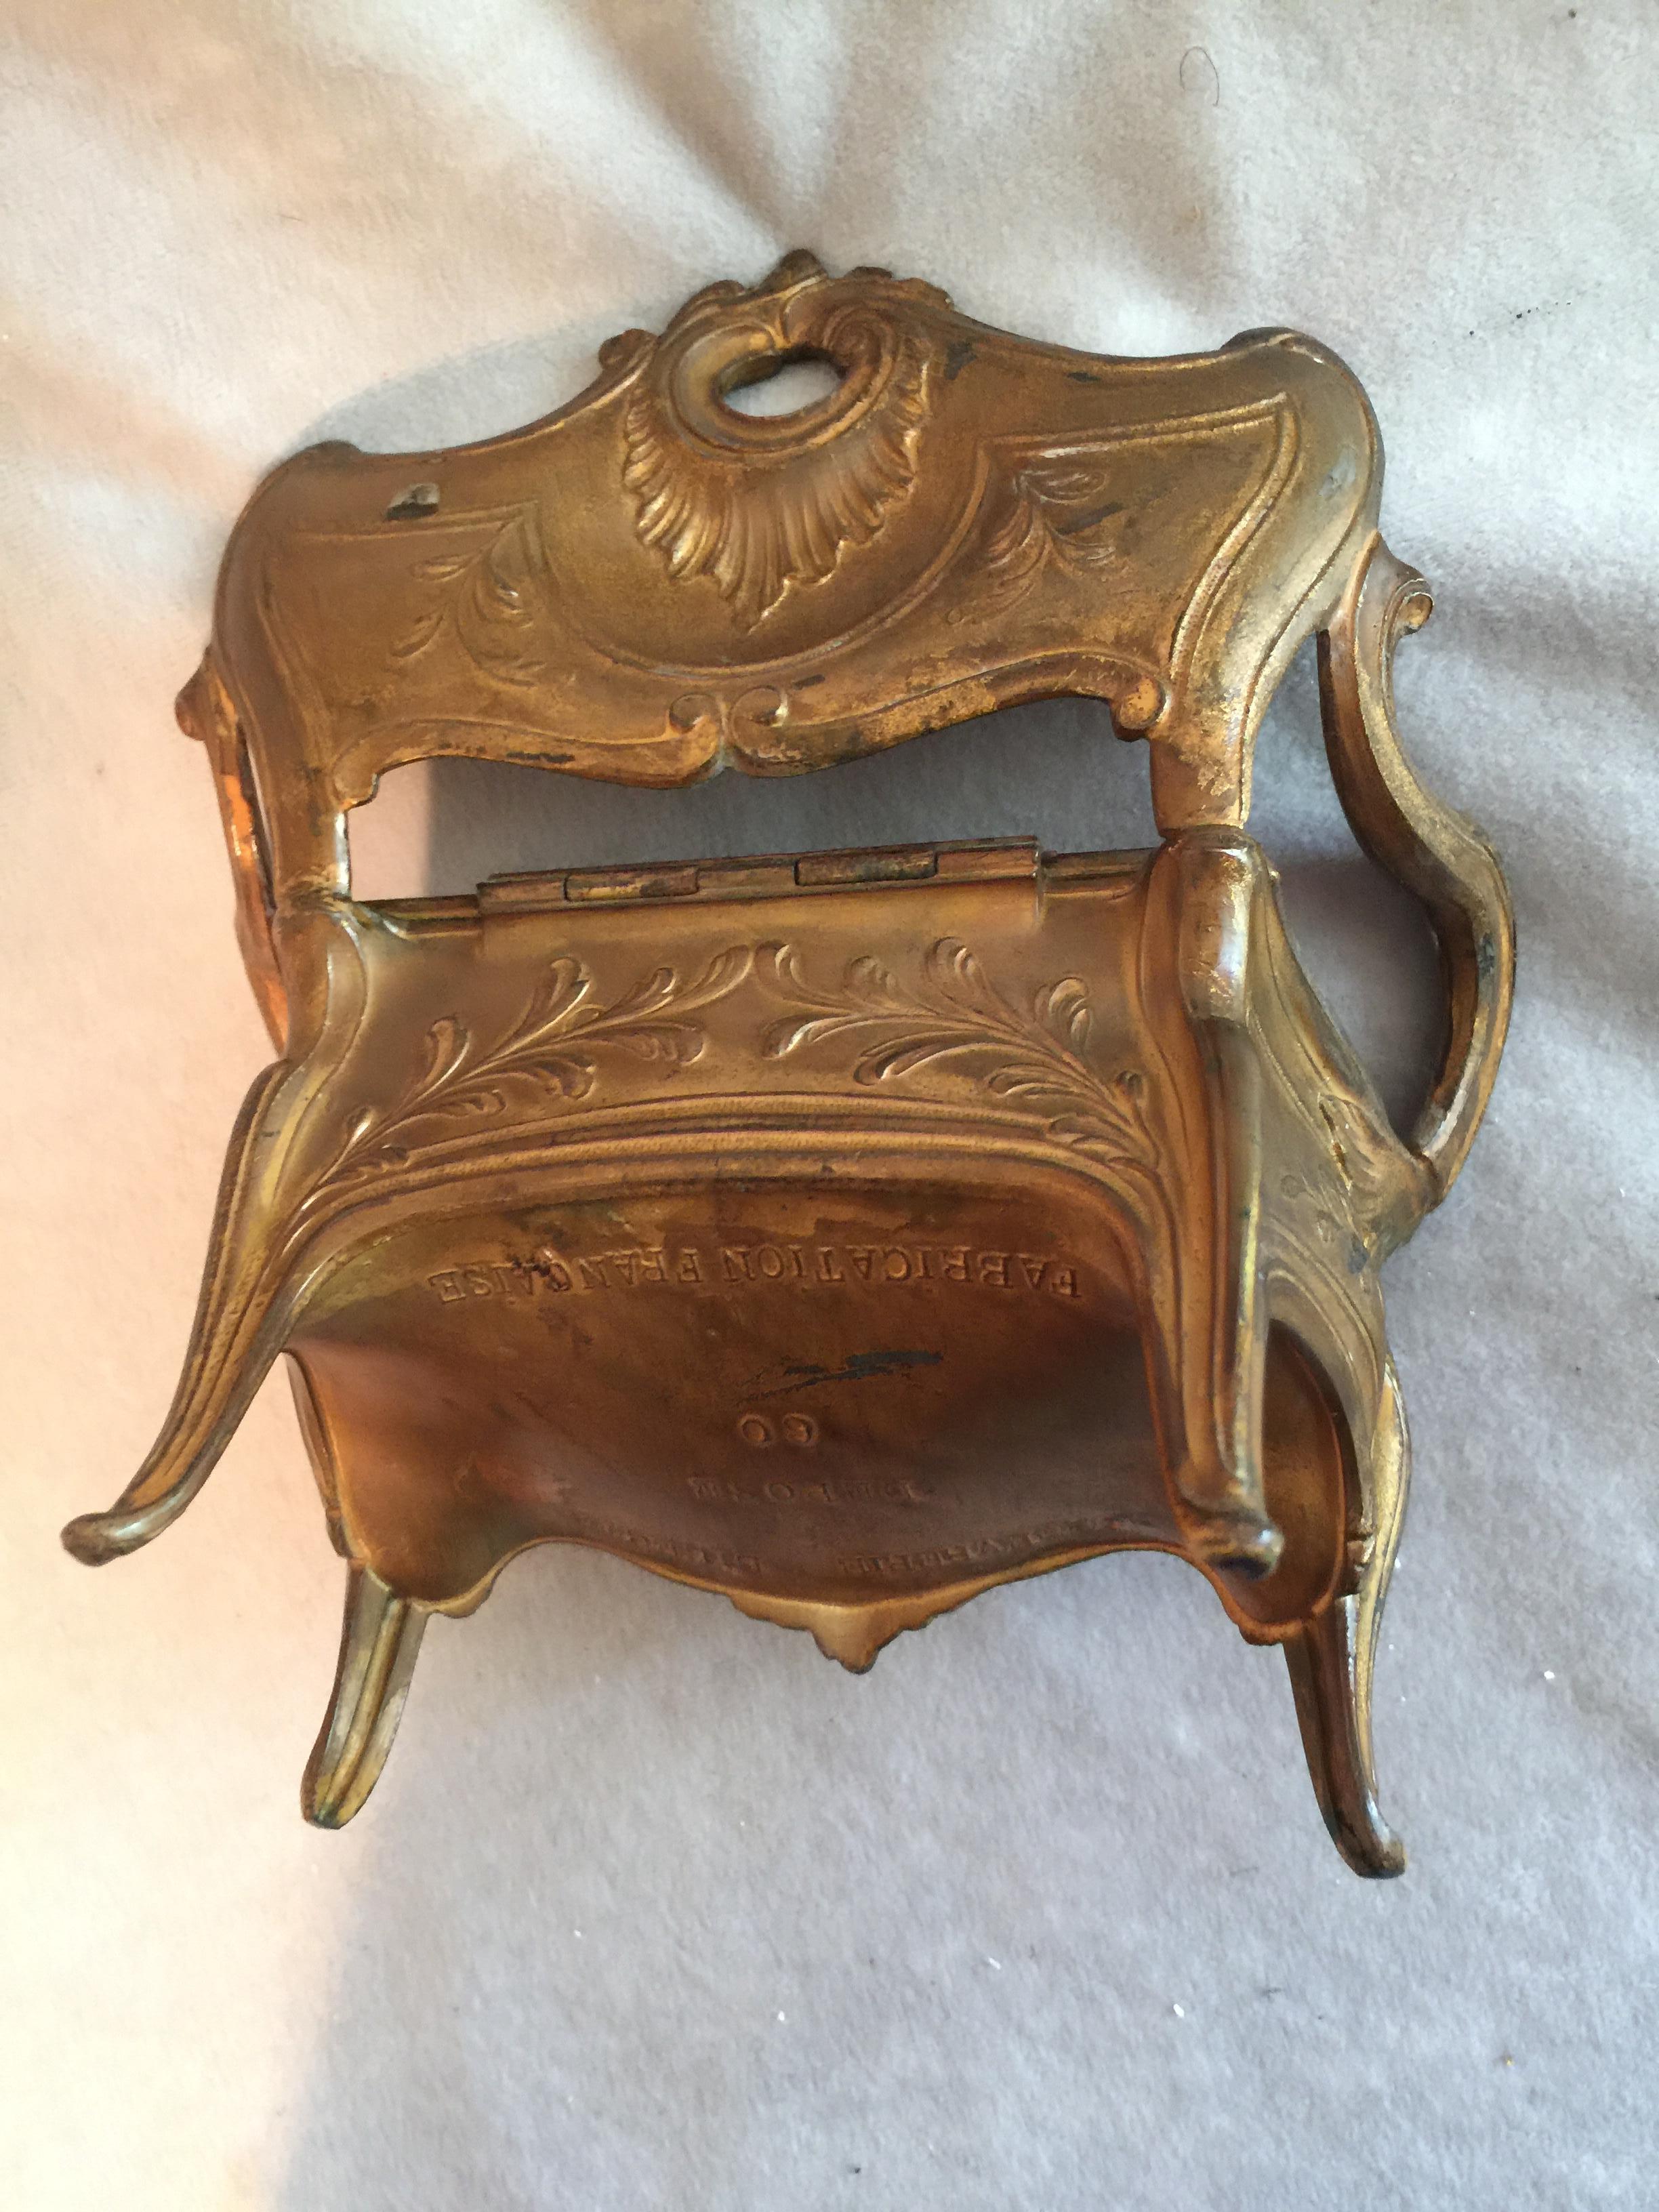 20th Century Unusual French Antique Mini Jewelry Box in the Form of a Loveseat, Gilt Metal